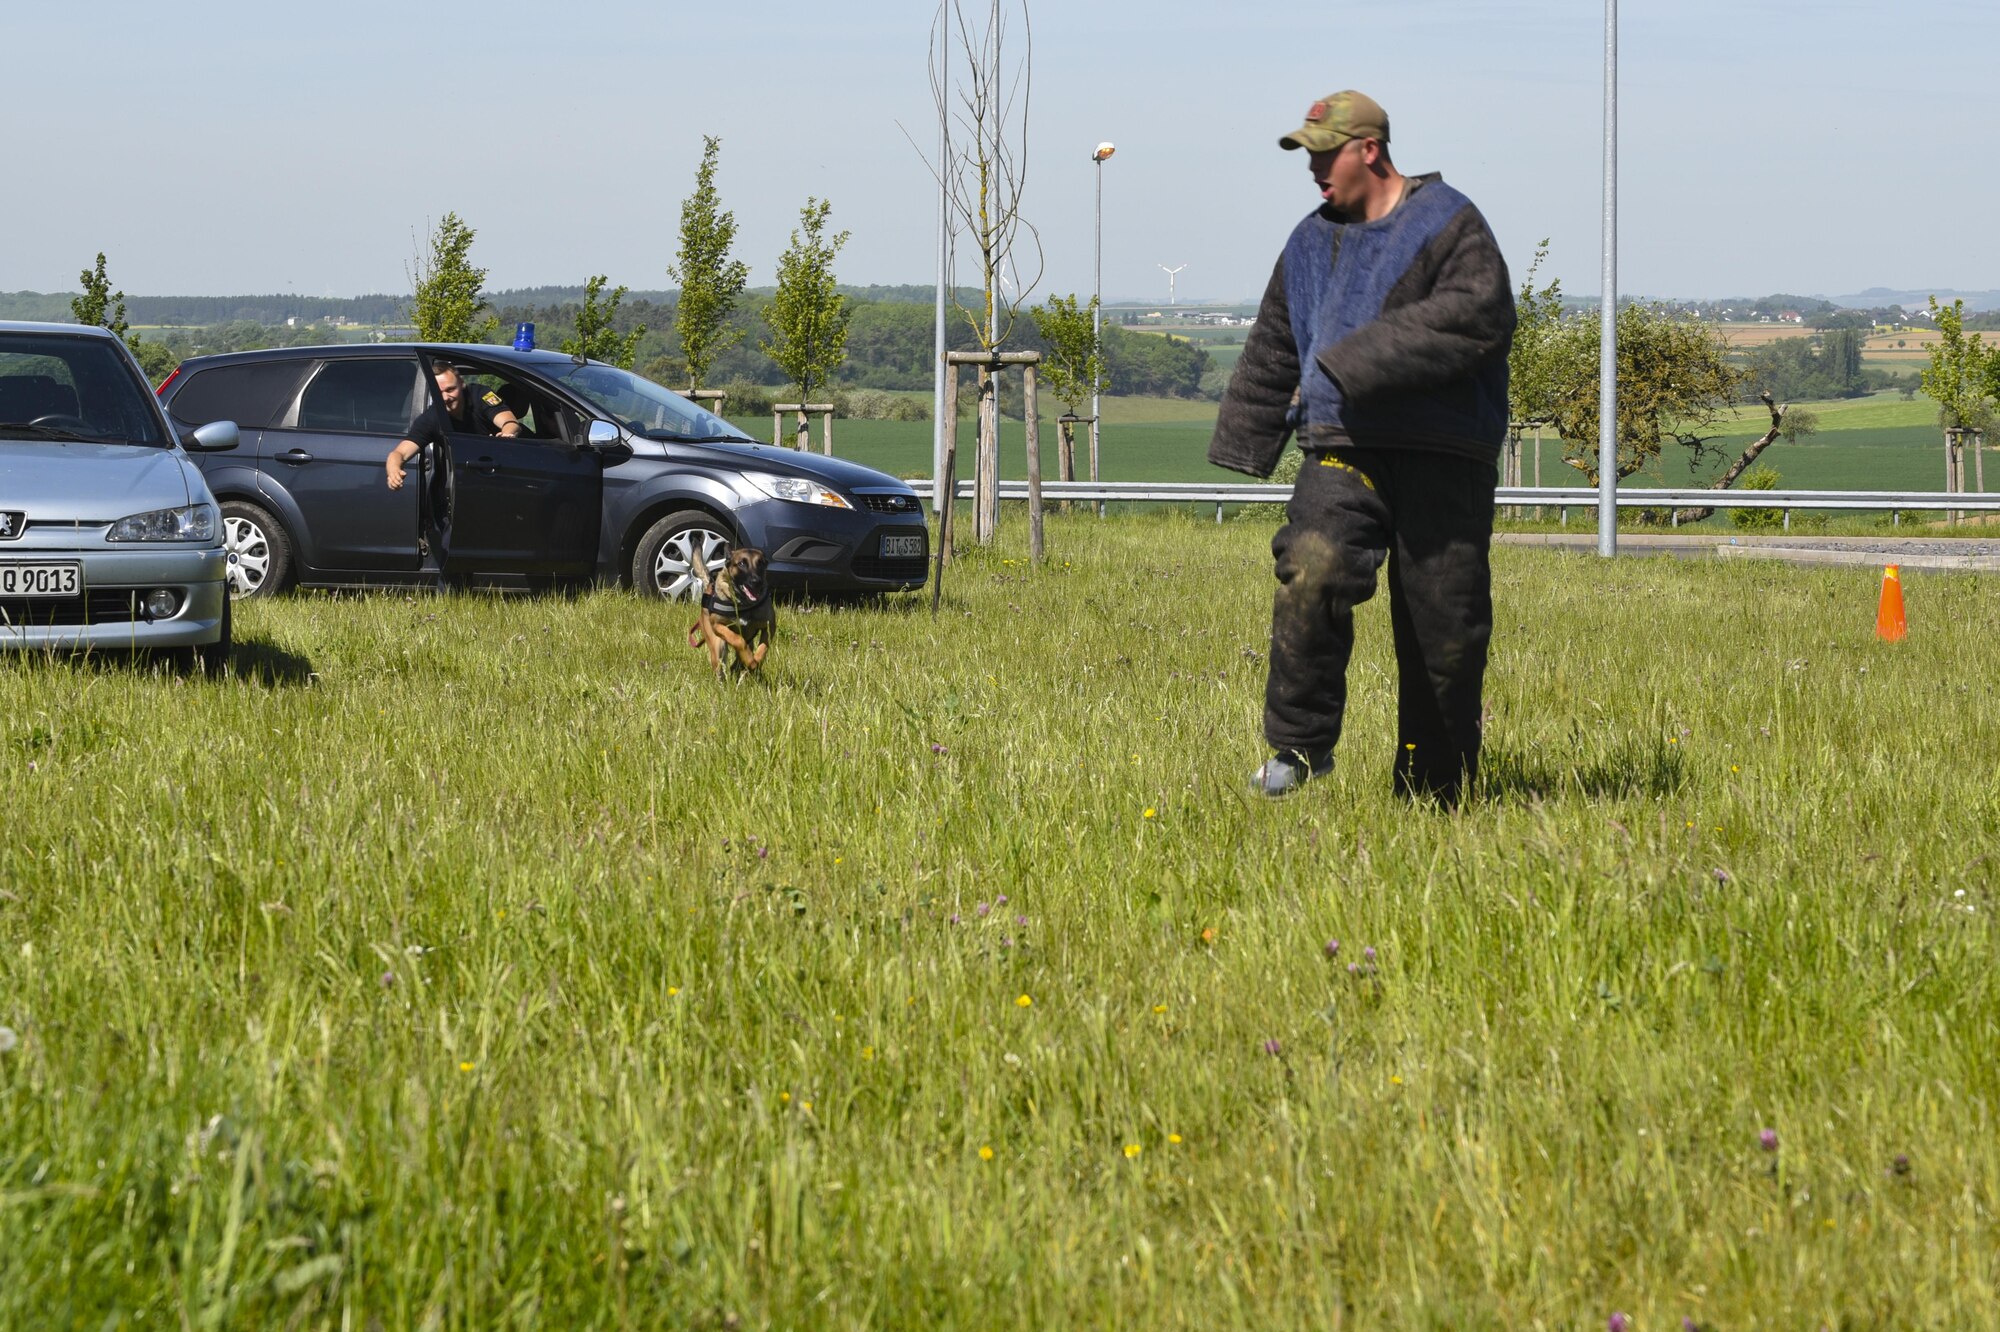 U.S. Air Force Staff Sgt. Tyler Catey, 52nd Security Forces Squadron military working dog trainer and Luxembourg Policemen, demonstrate working dog take-down techniques to Spangdahlem Elementary School students at Spangdahlem Air Base, Germany, May 16, 2017. This event was part of U.S. National Police Week, which recognizes the men, women and their canine companions who wear the badge. (U.S. Air Force photo by Senior Airman Dawn M. Weber)